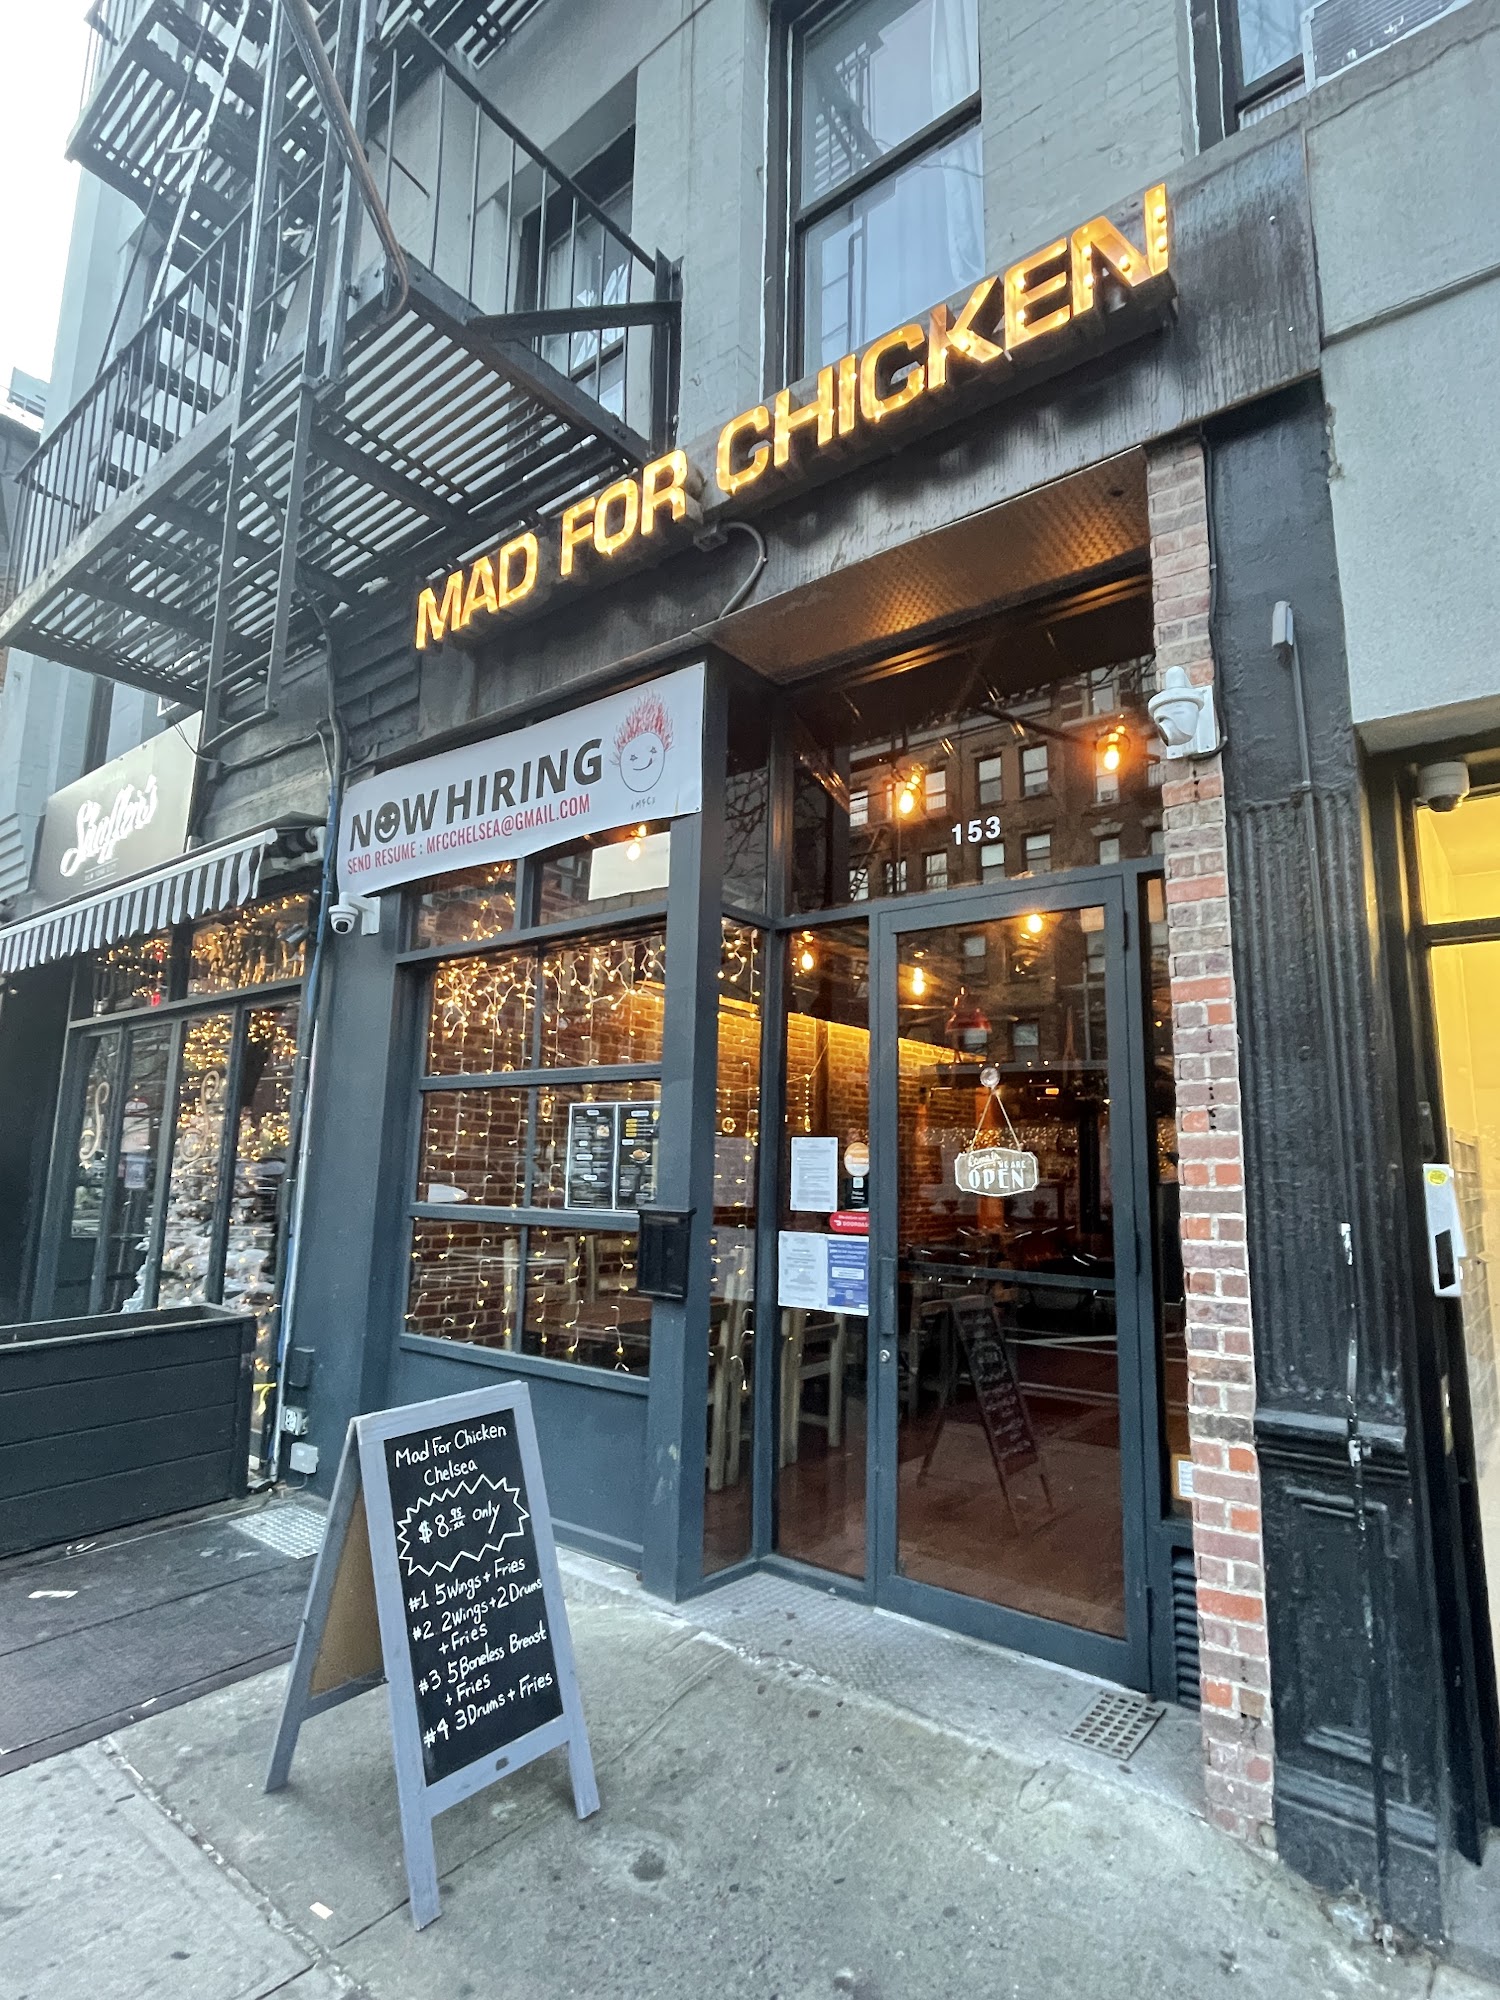 Mad for Chicken Chelsea